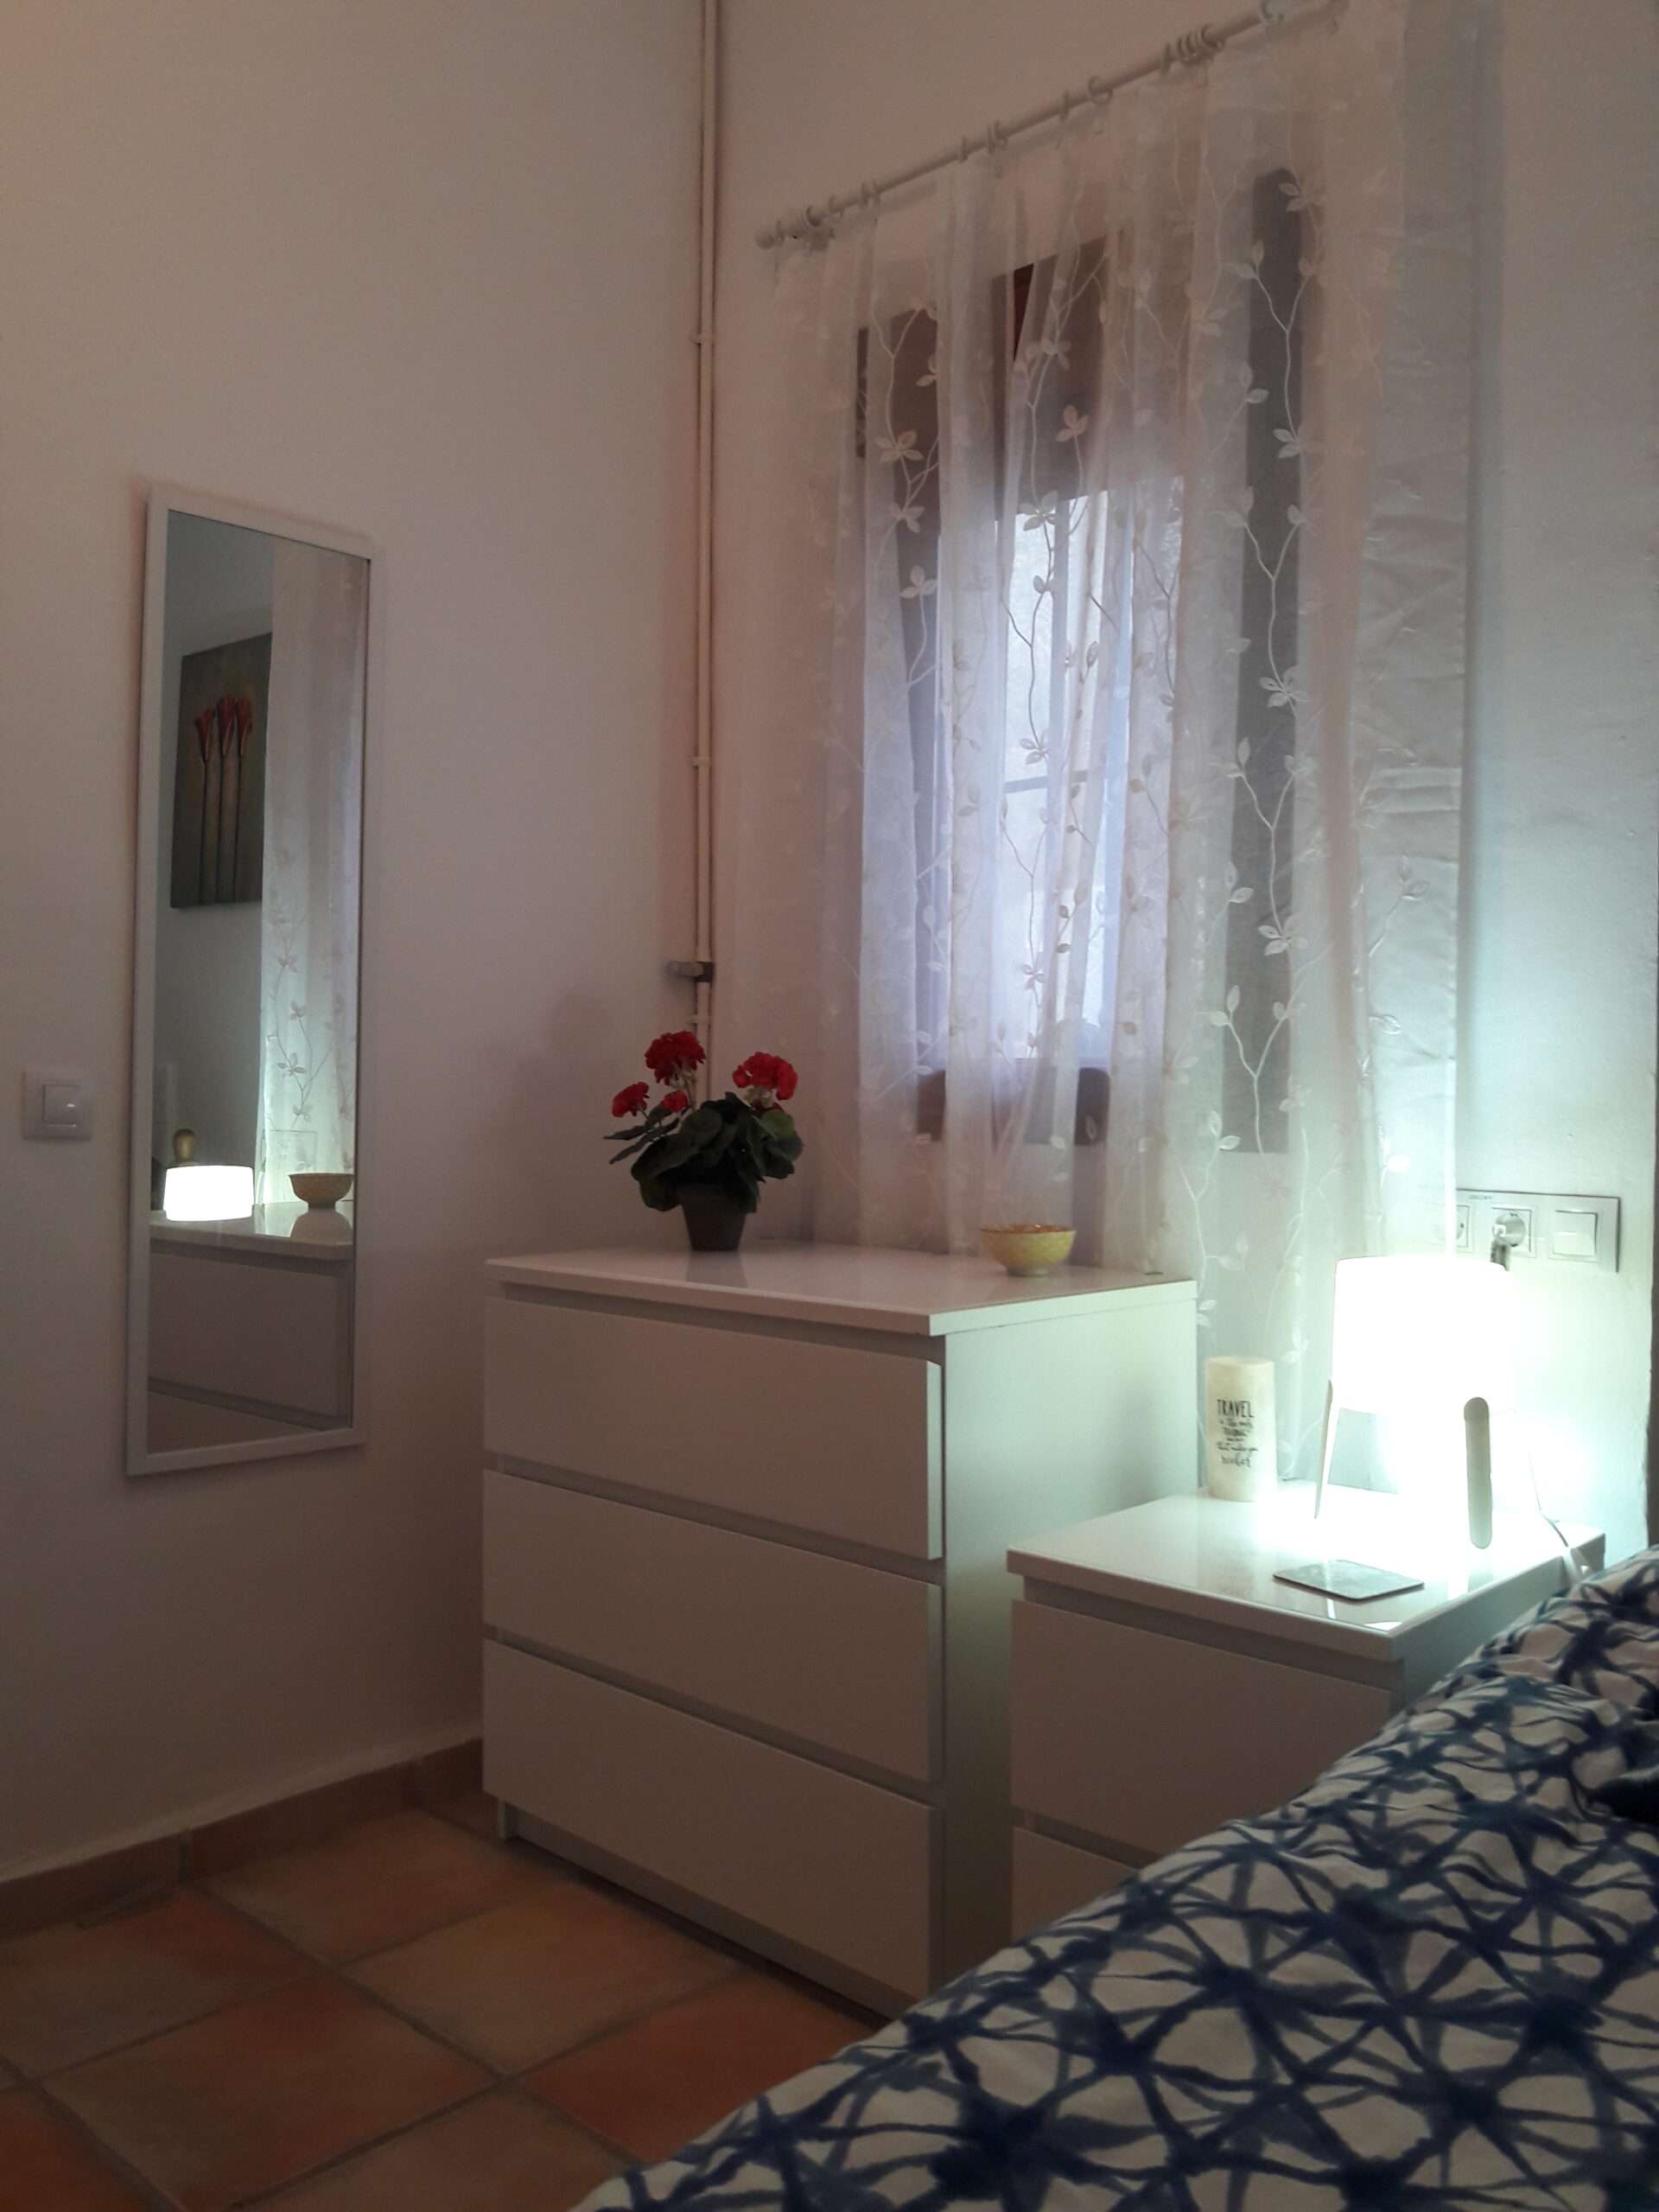 Single bedroom with white drawer units